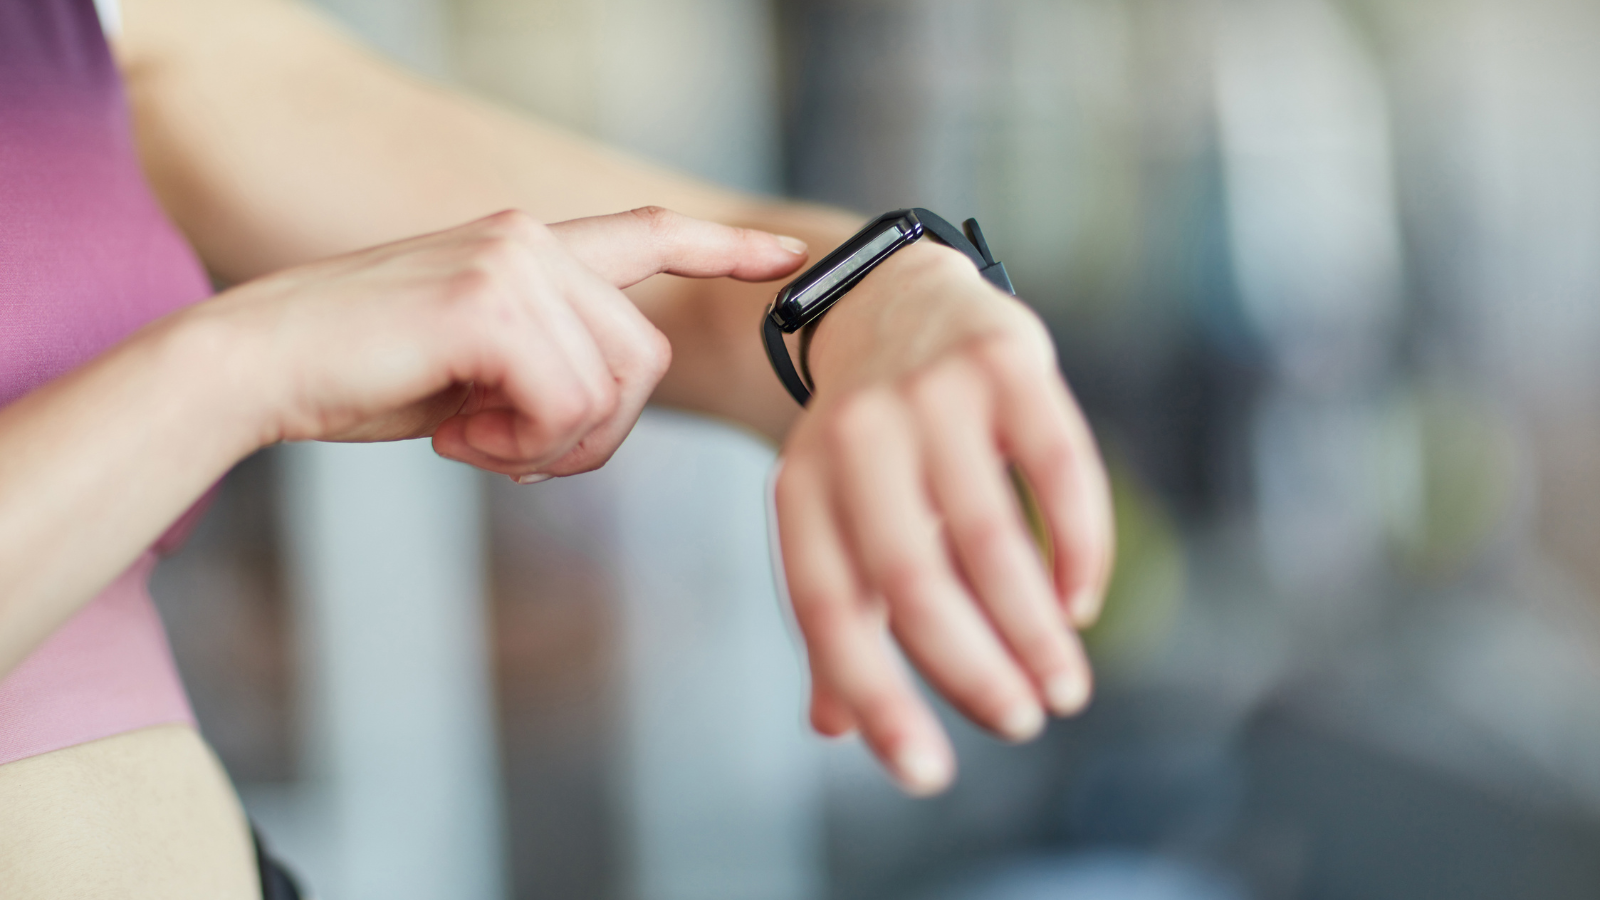 Why is a quarter of the population now wearing heart rate wearables?